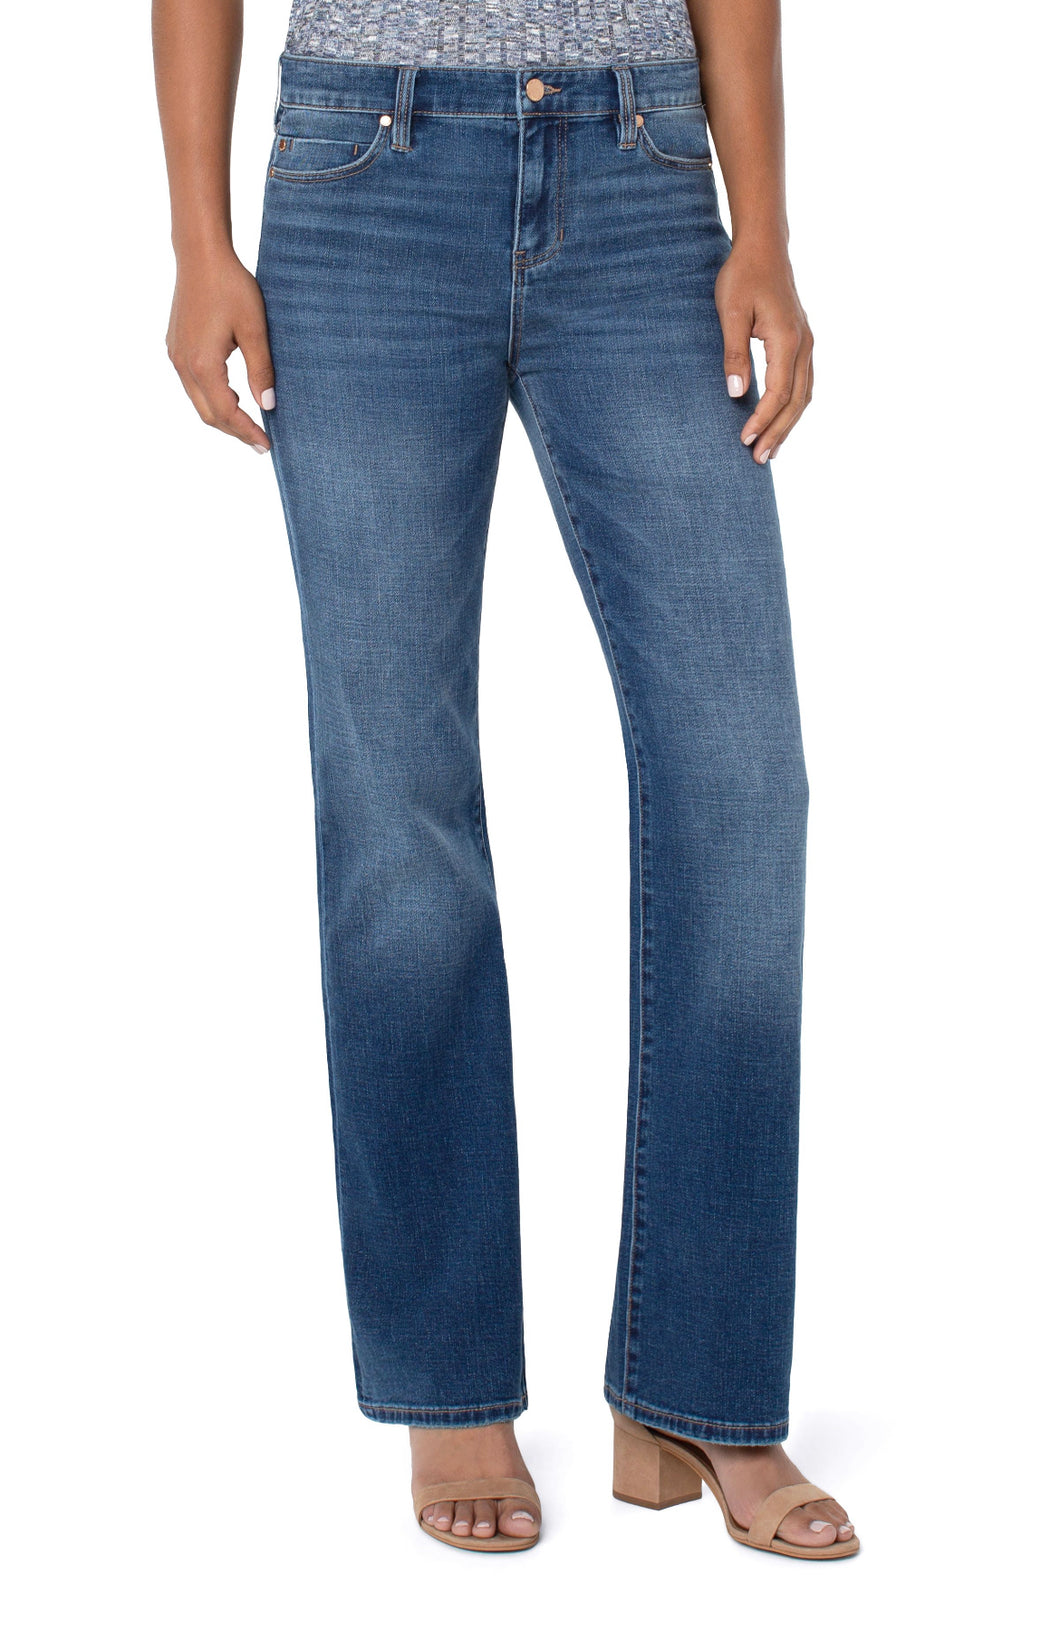 Liverpool: Lucy 32 Inch Inseam Bootcut Jeans in Yuba Wash